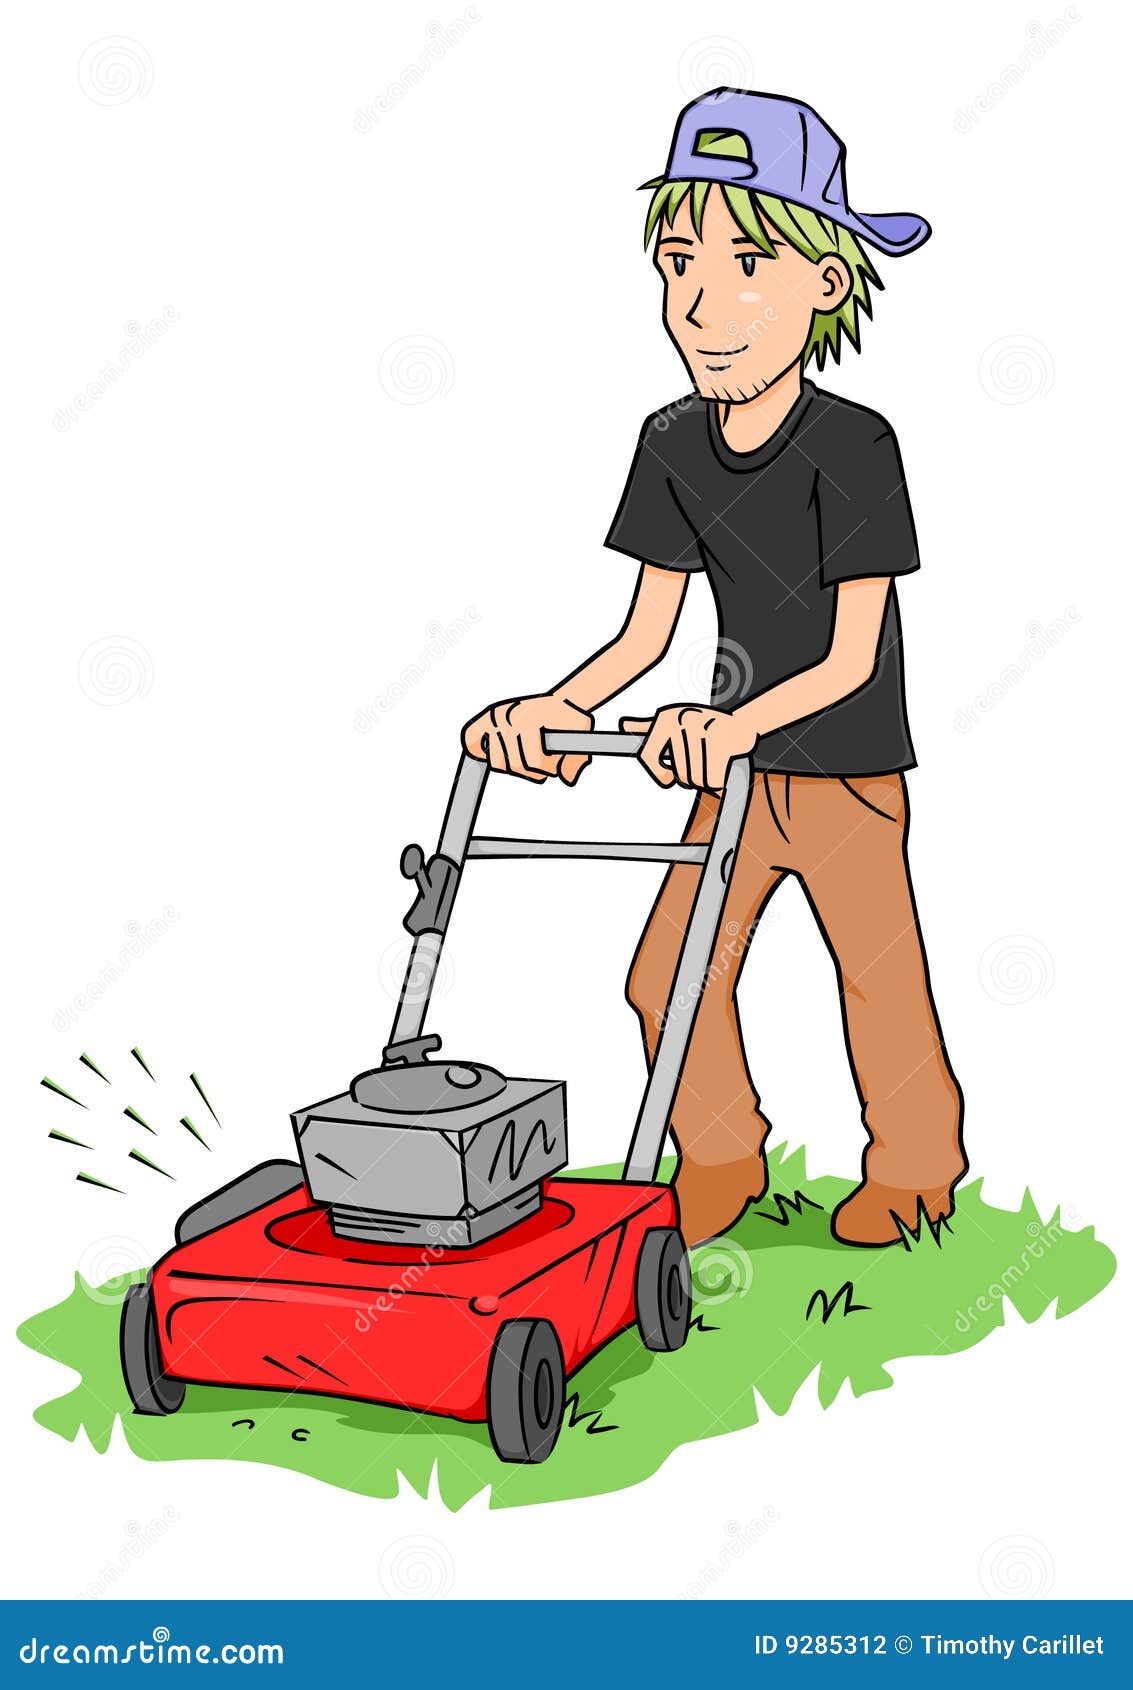 clipart man mowing lawn - photo #14